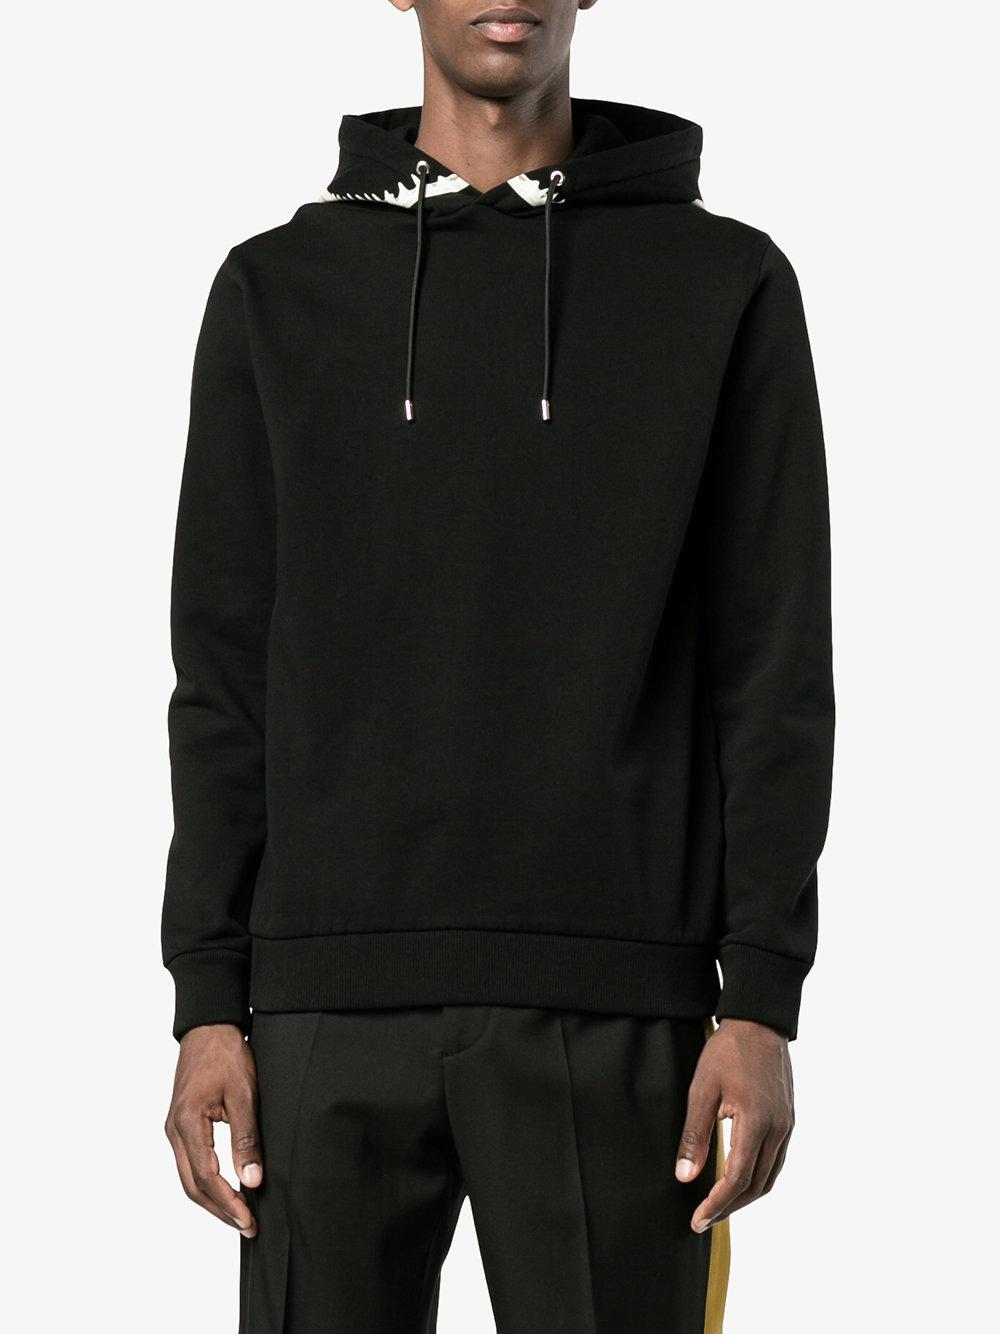 Lyst - Givenchy Shark Tooth Printed Hoodie in Black for Men